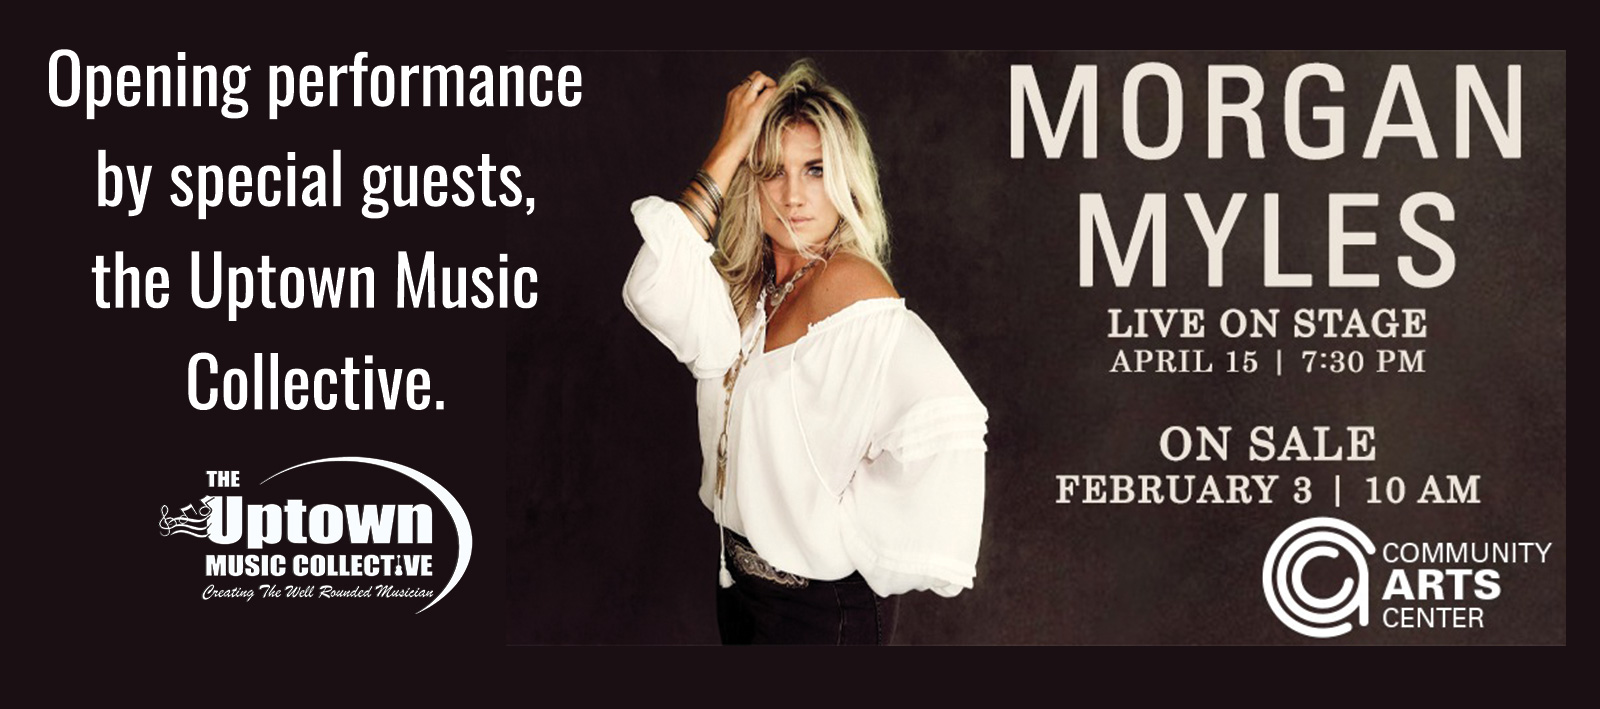 Morgan Myles Live on Stage at the Community Arts Center on April 15, 2023.